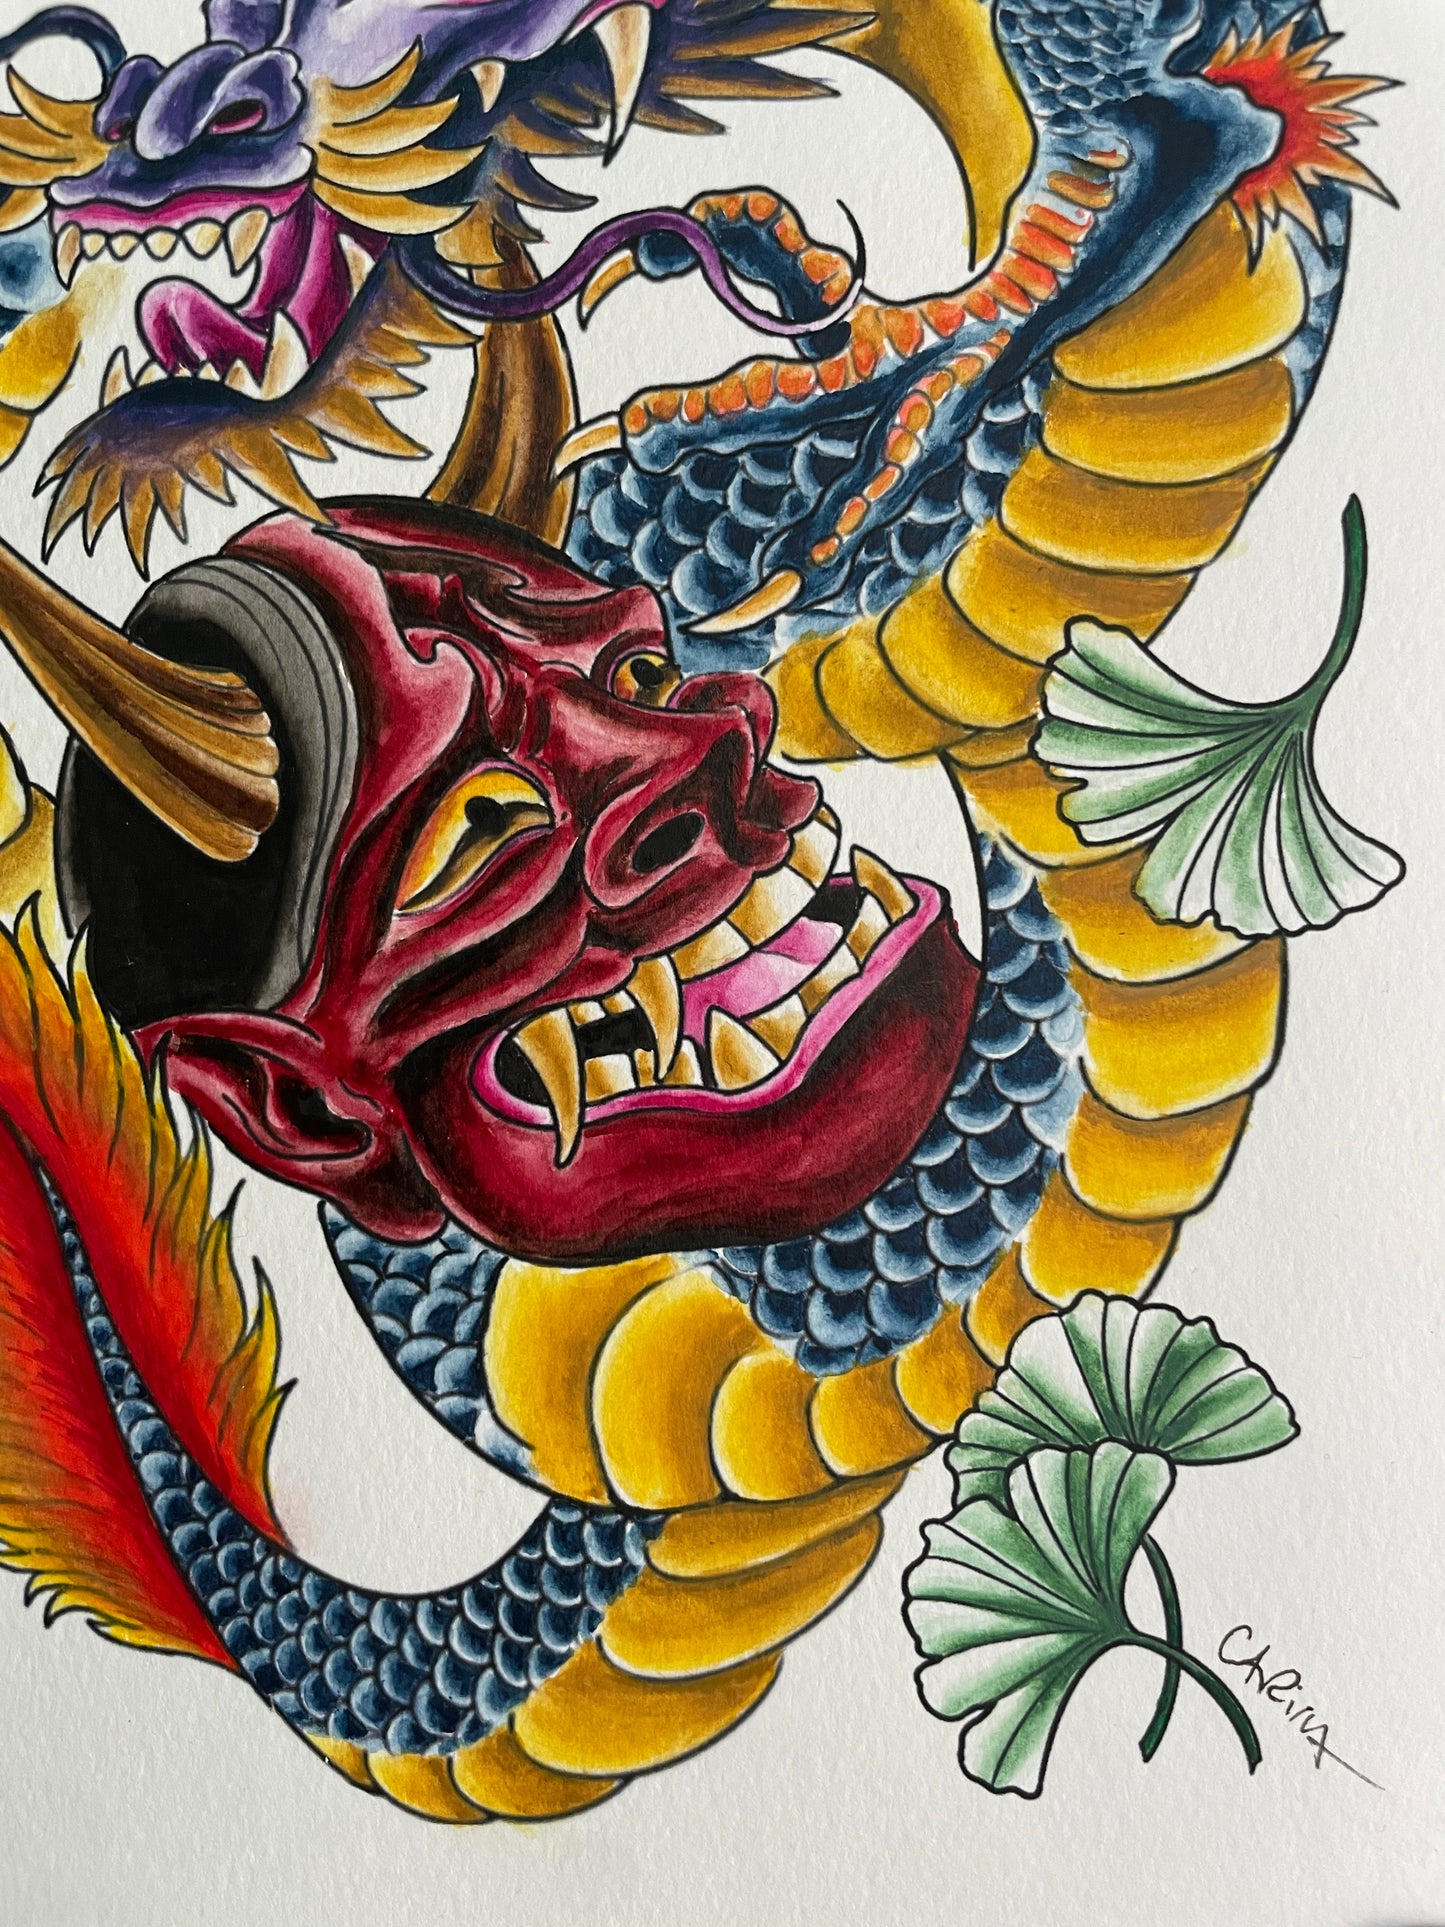 Dragon and Hannya Mask with Ginko Leaves Original Watercolor Painting 9x12